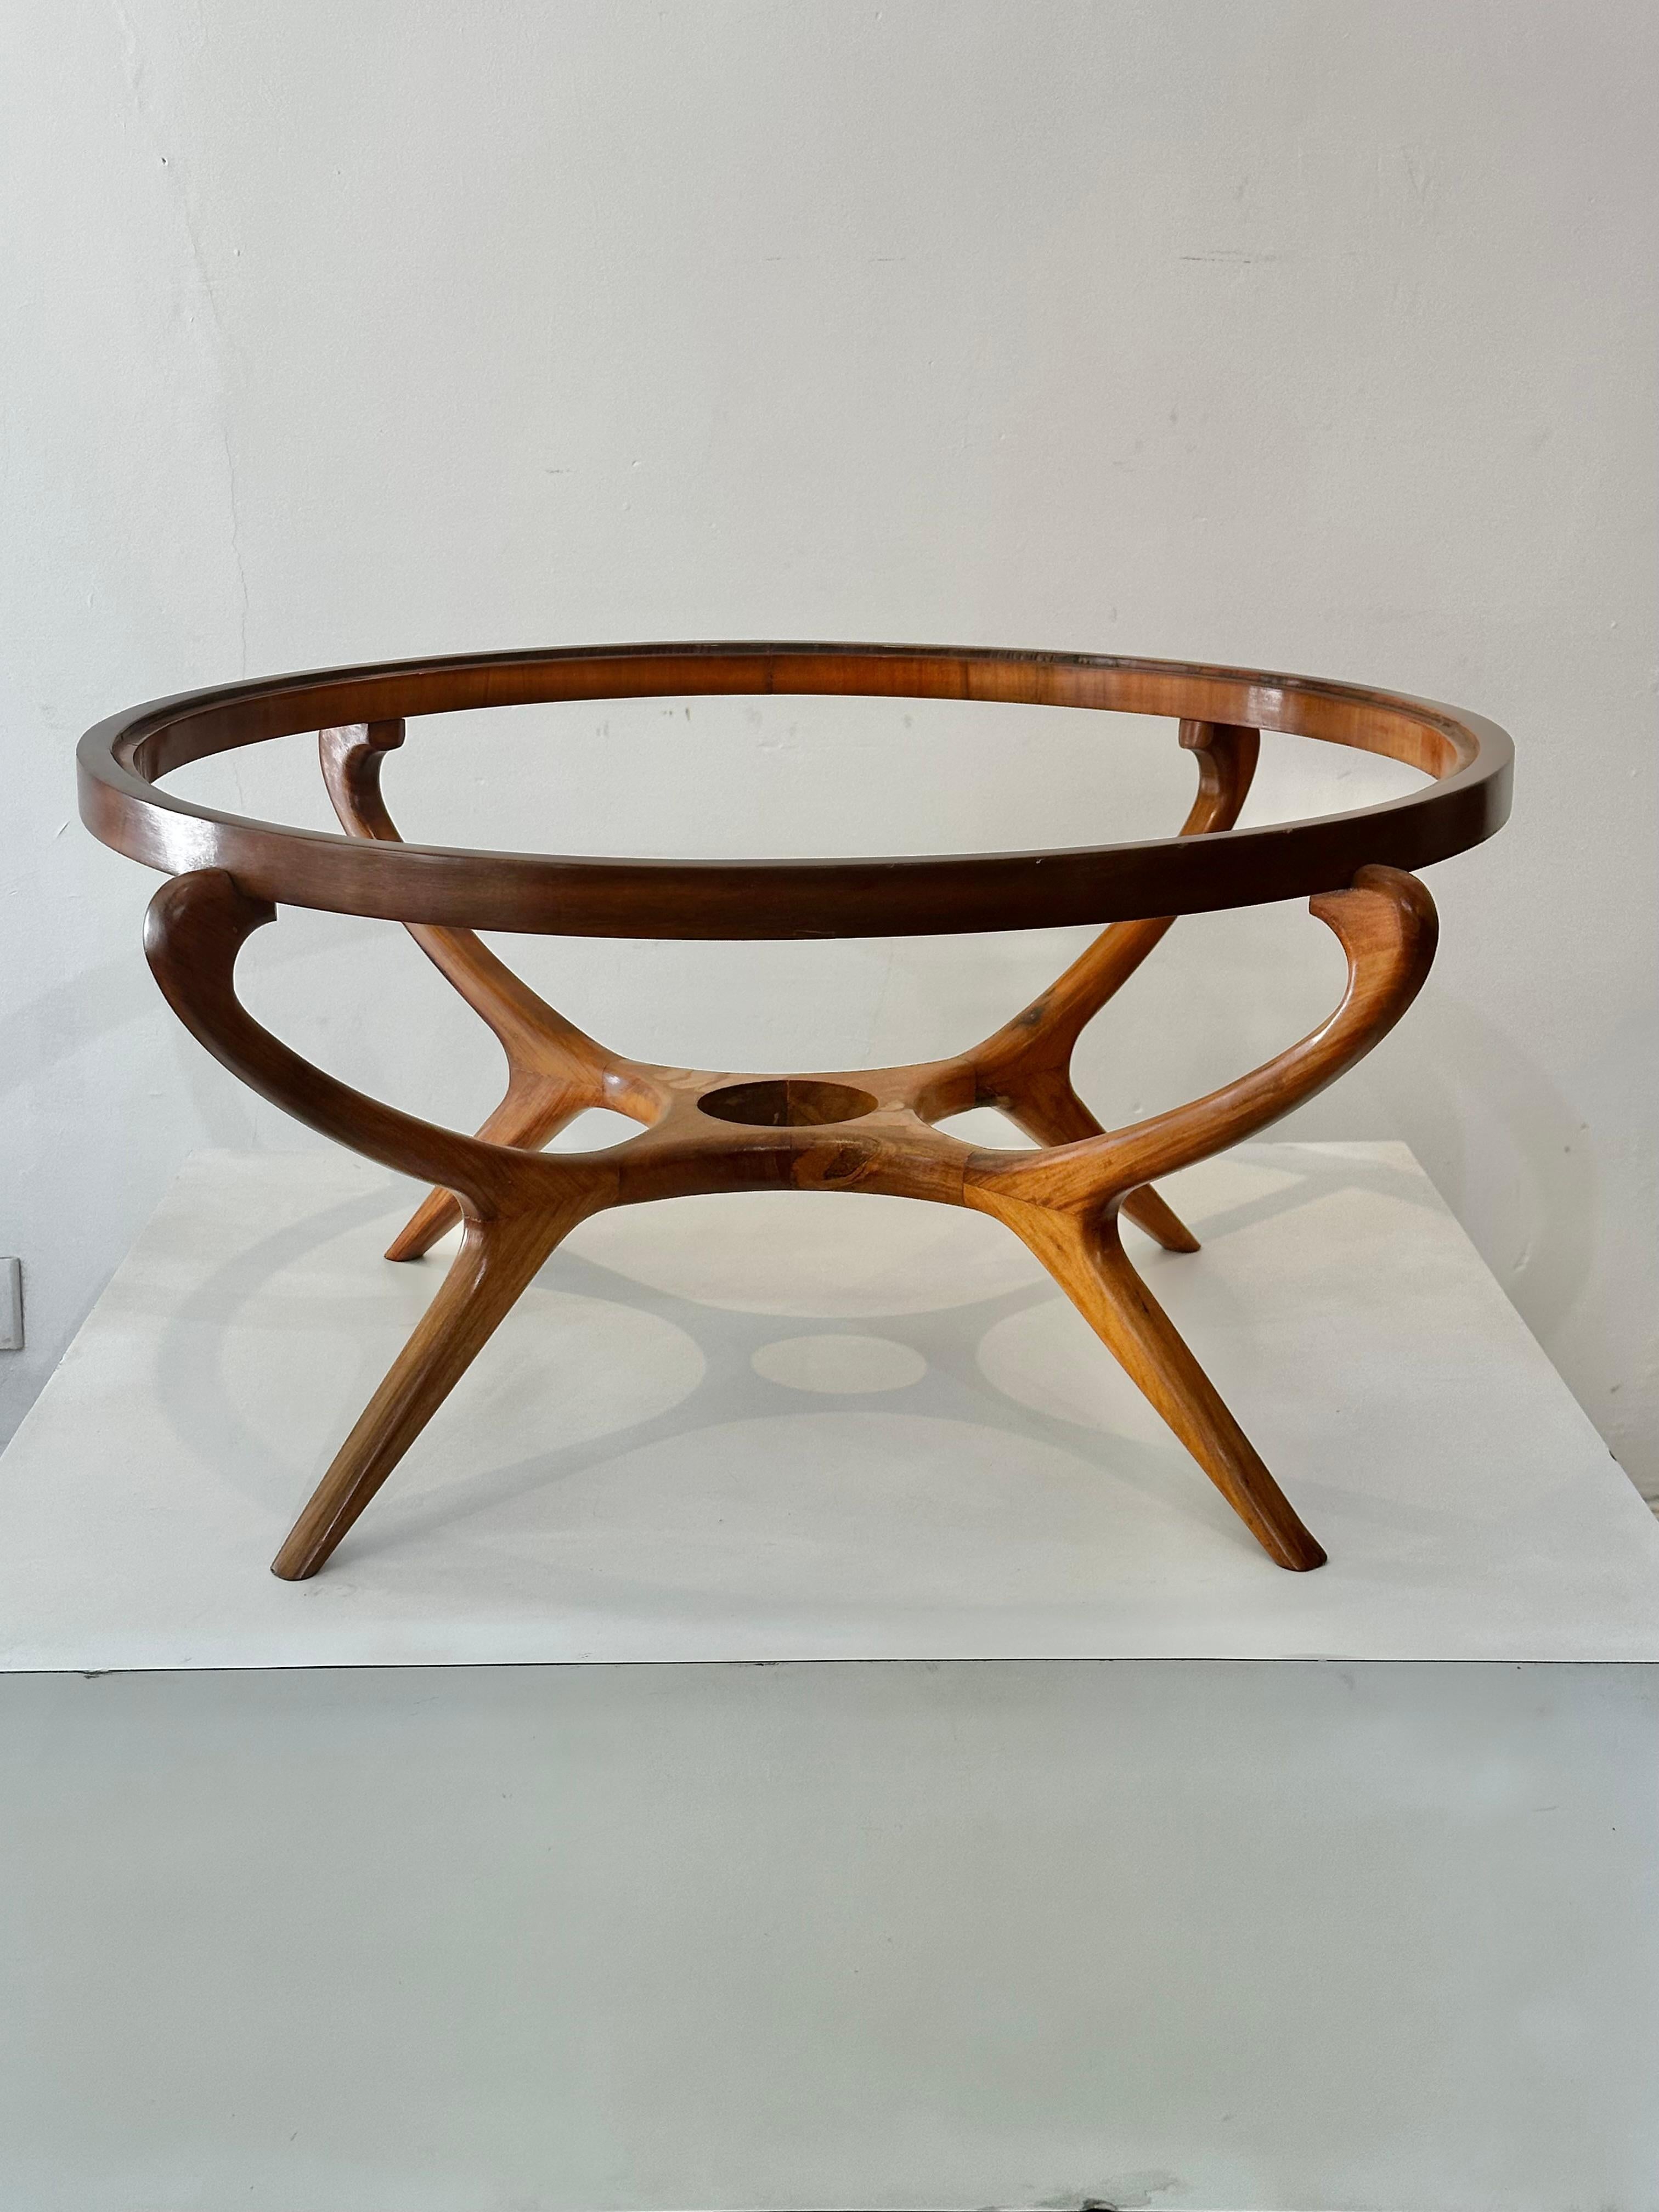 Giuseppe Scapinelli's round coffee table, a piece made of solid caviúna wood (also known as 